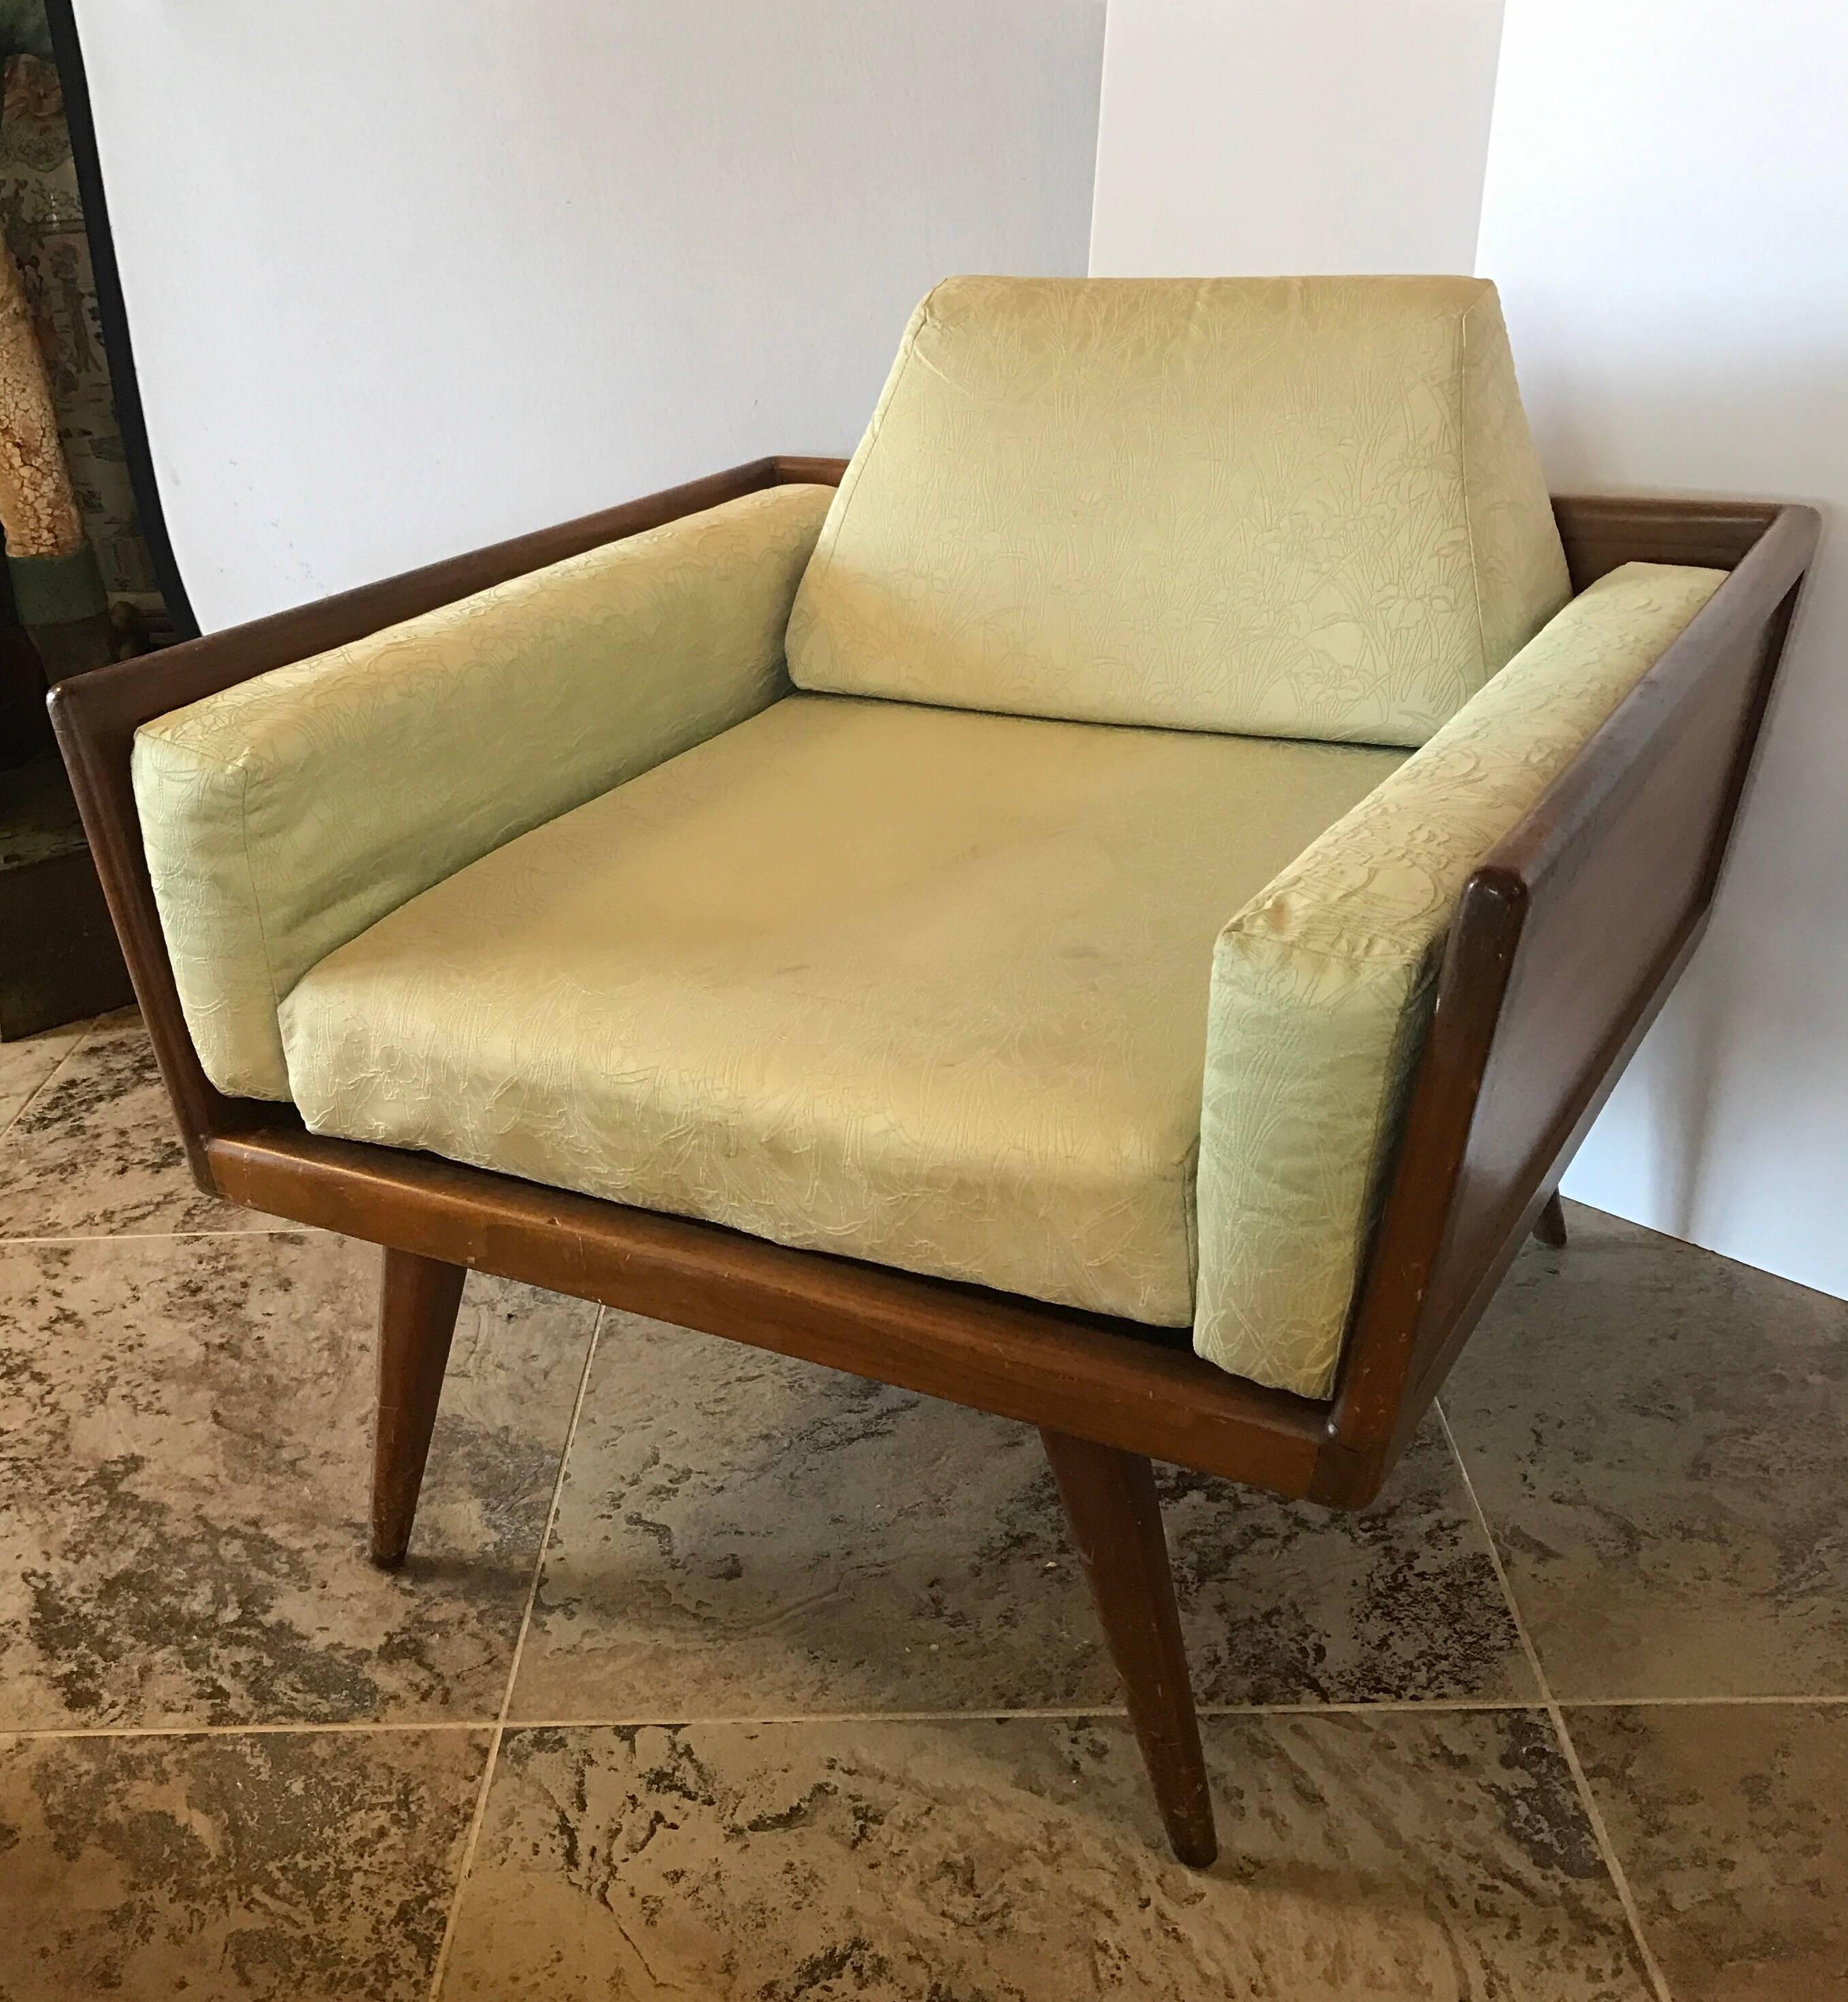 Mid-20th Century Mel Smilow for Smilow Thielle Signed Walnut Lounge Chair, 1950s